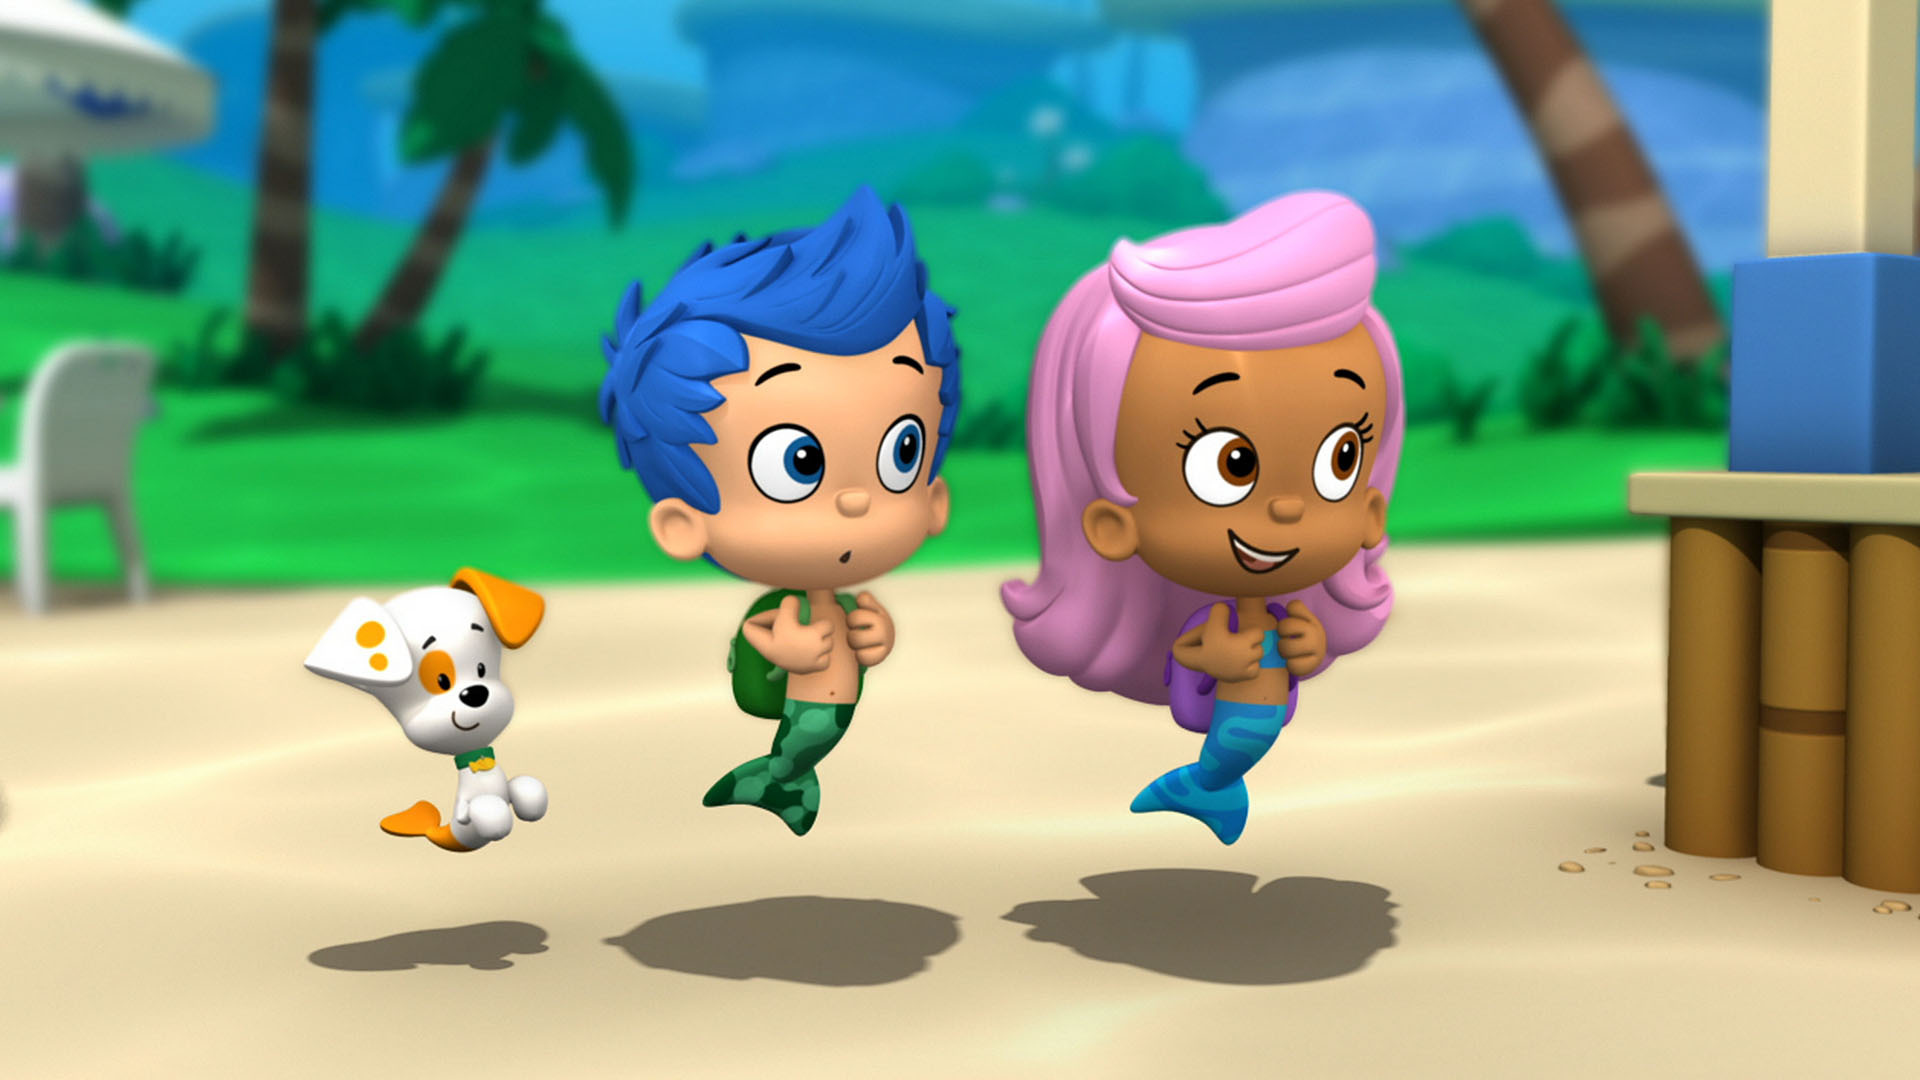 blue hair dude from bubble guppies